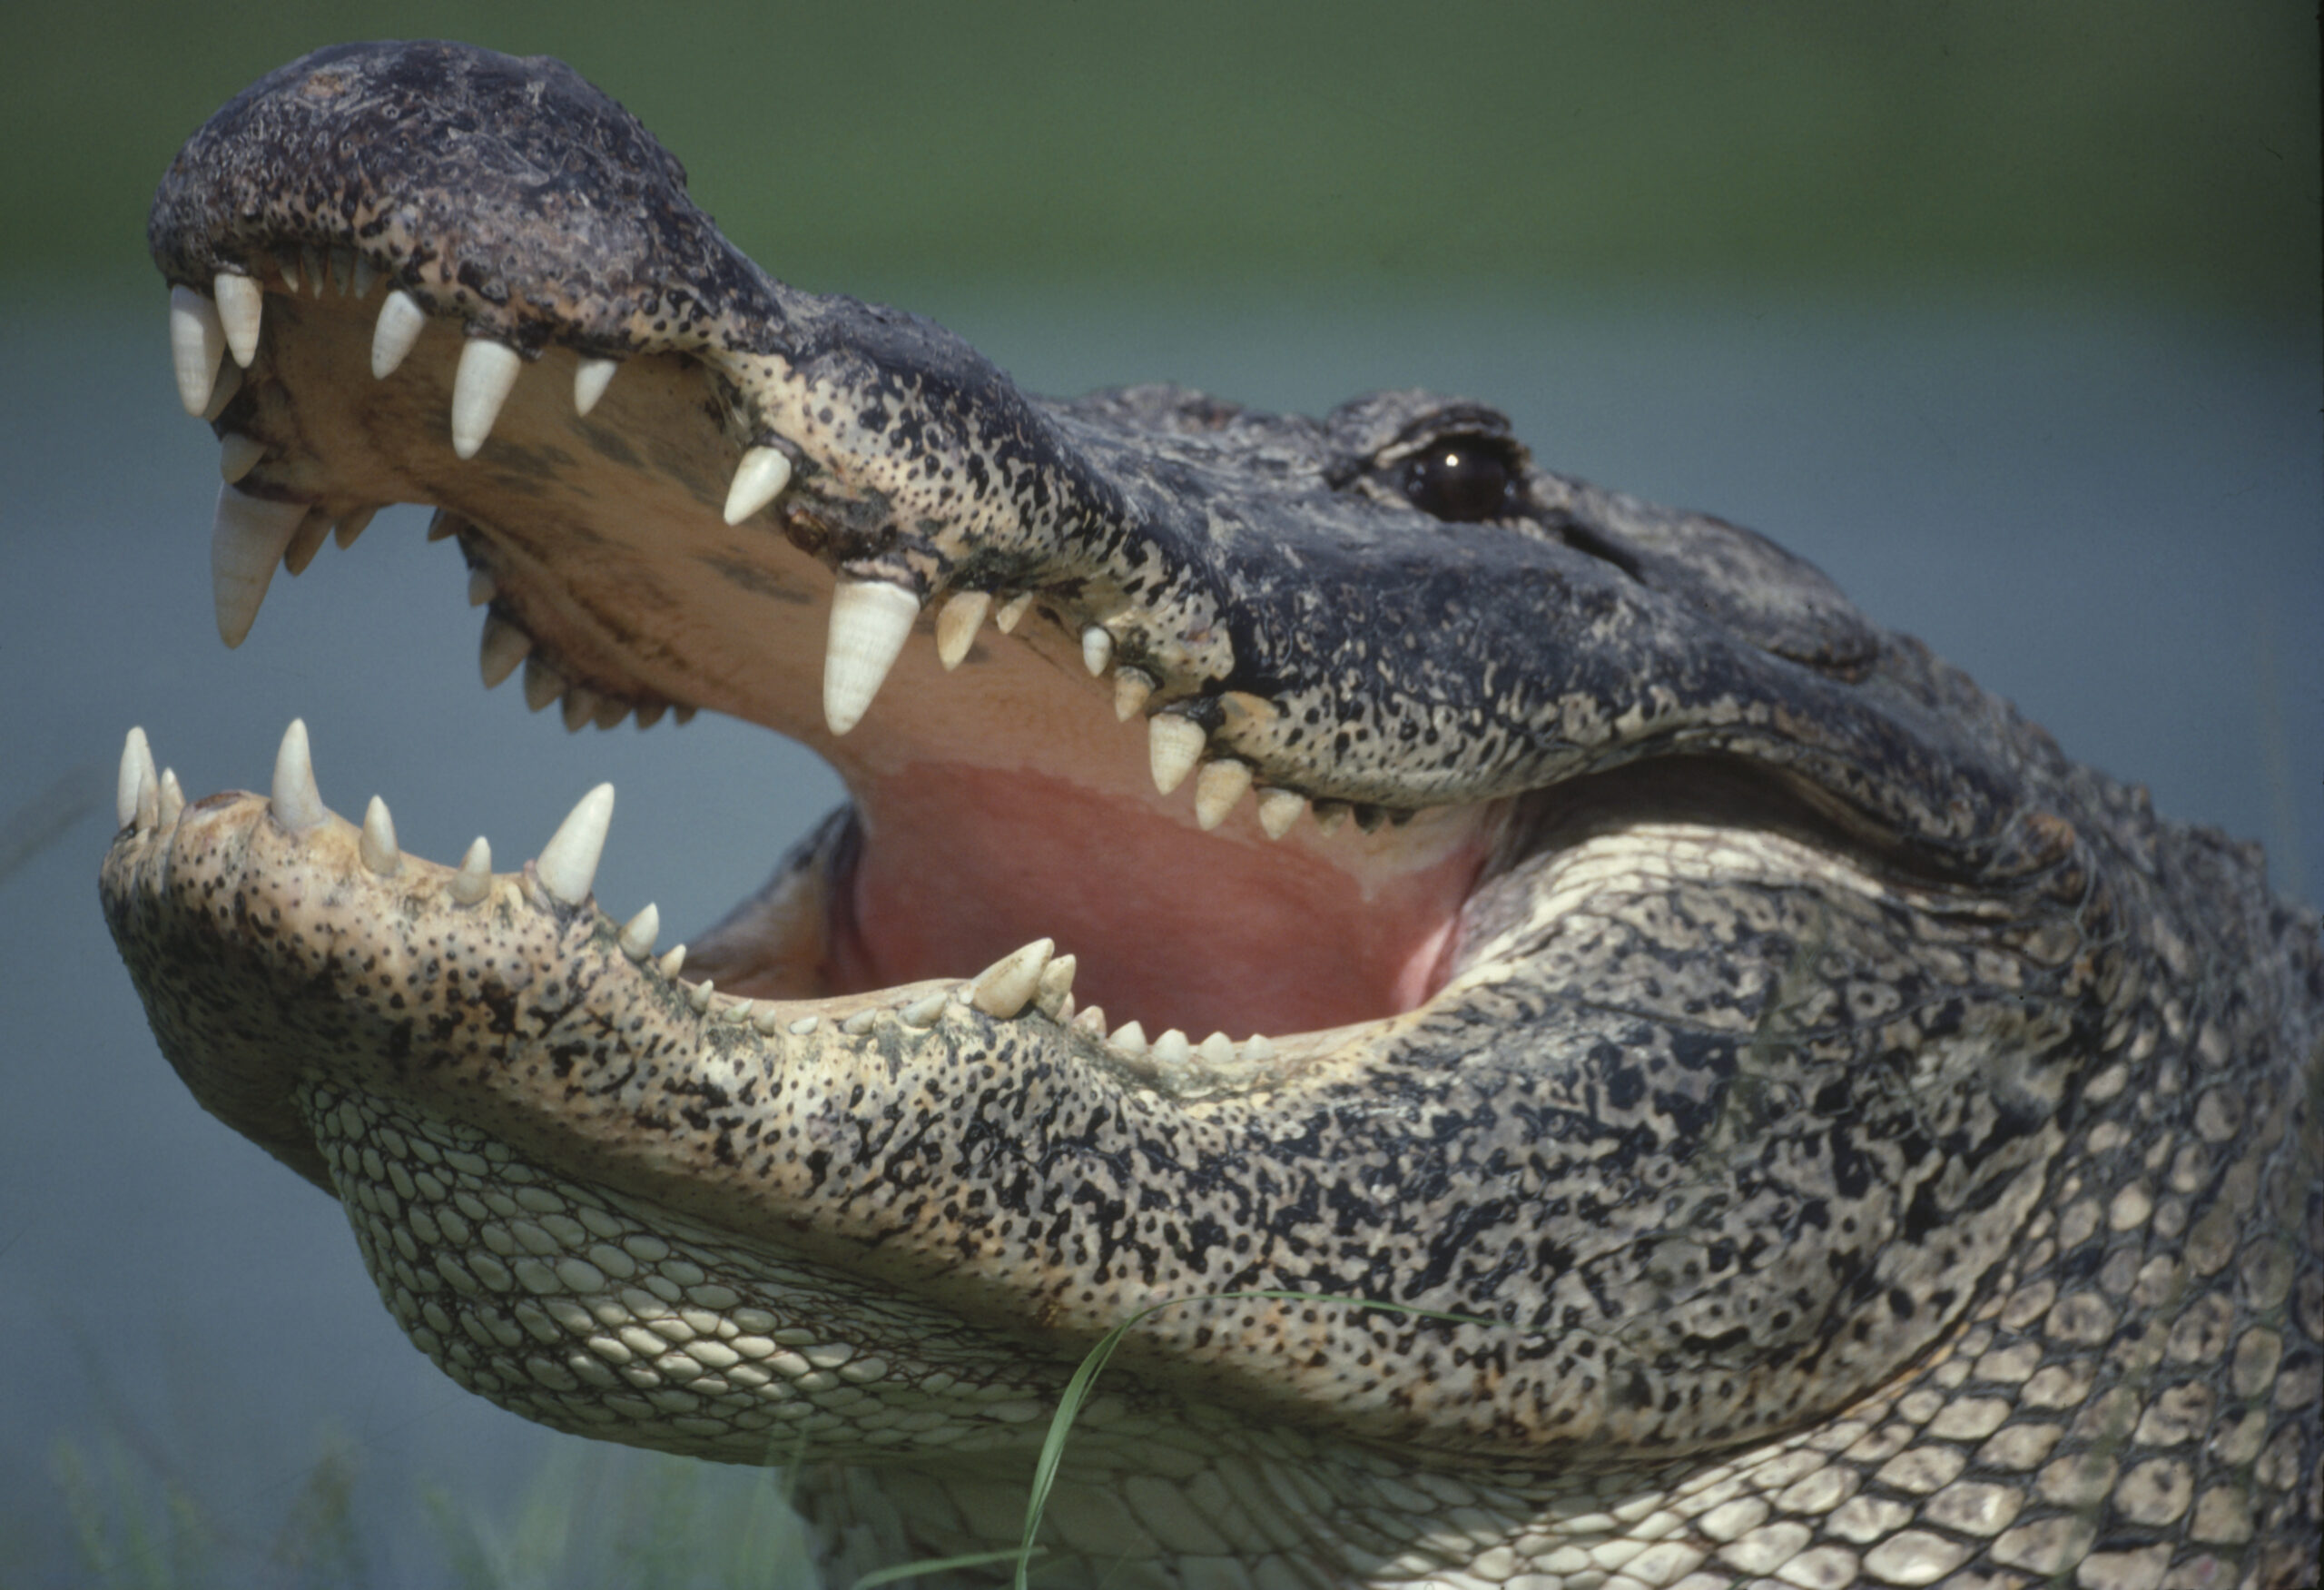 Nine-Foot Gator Attacks Florida Man The Moment He Walks Out Of His Home: Report